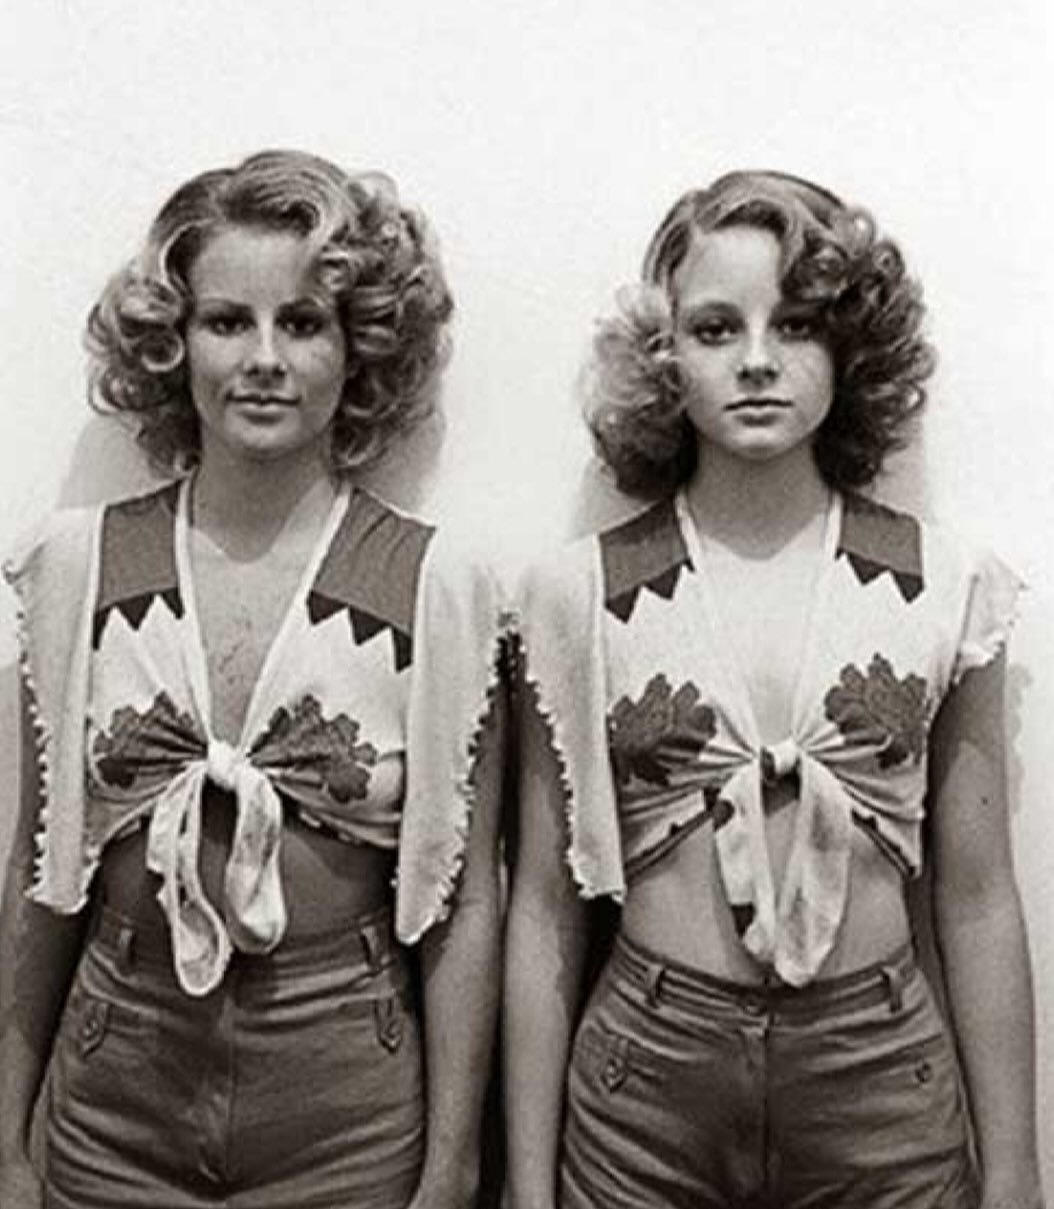 Jodie Foster and her older sister Connie, who stood in for the 14-year-old Jodie on the set of Taxi Driver during the more explicit scenes.
.
.
.
@allthe_rightmovies